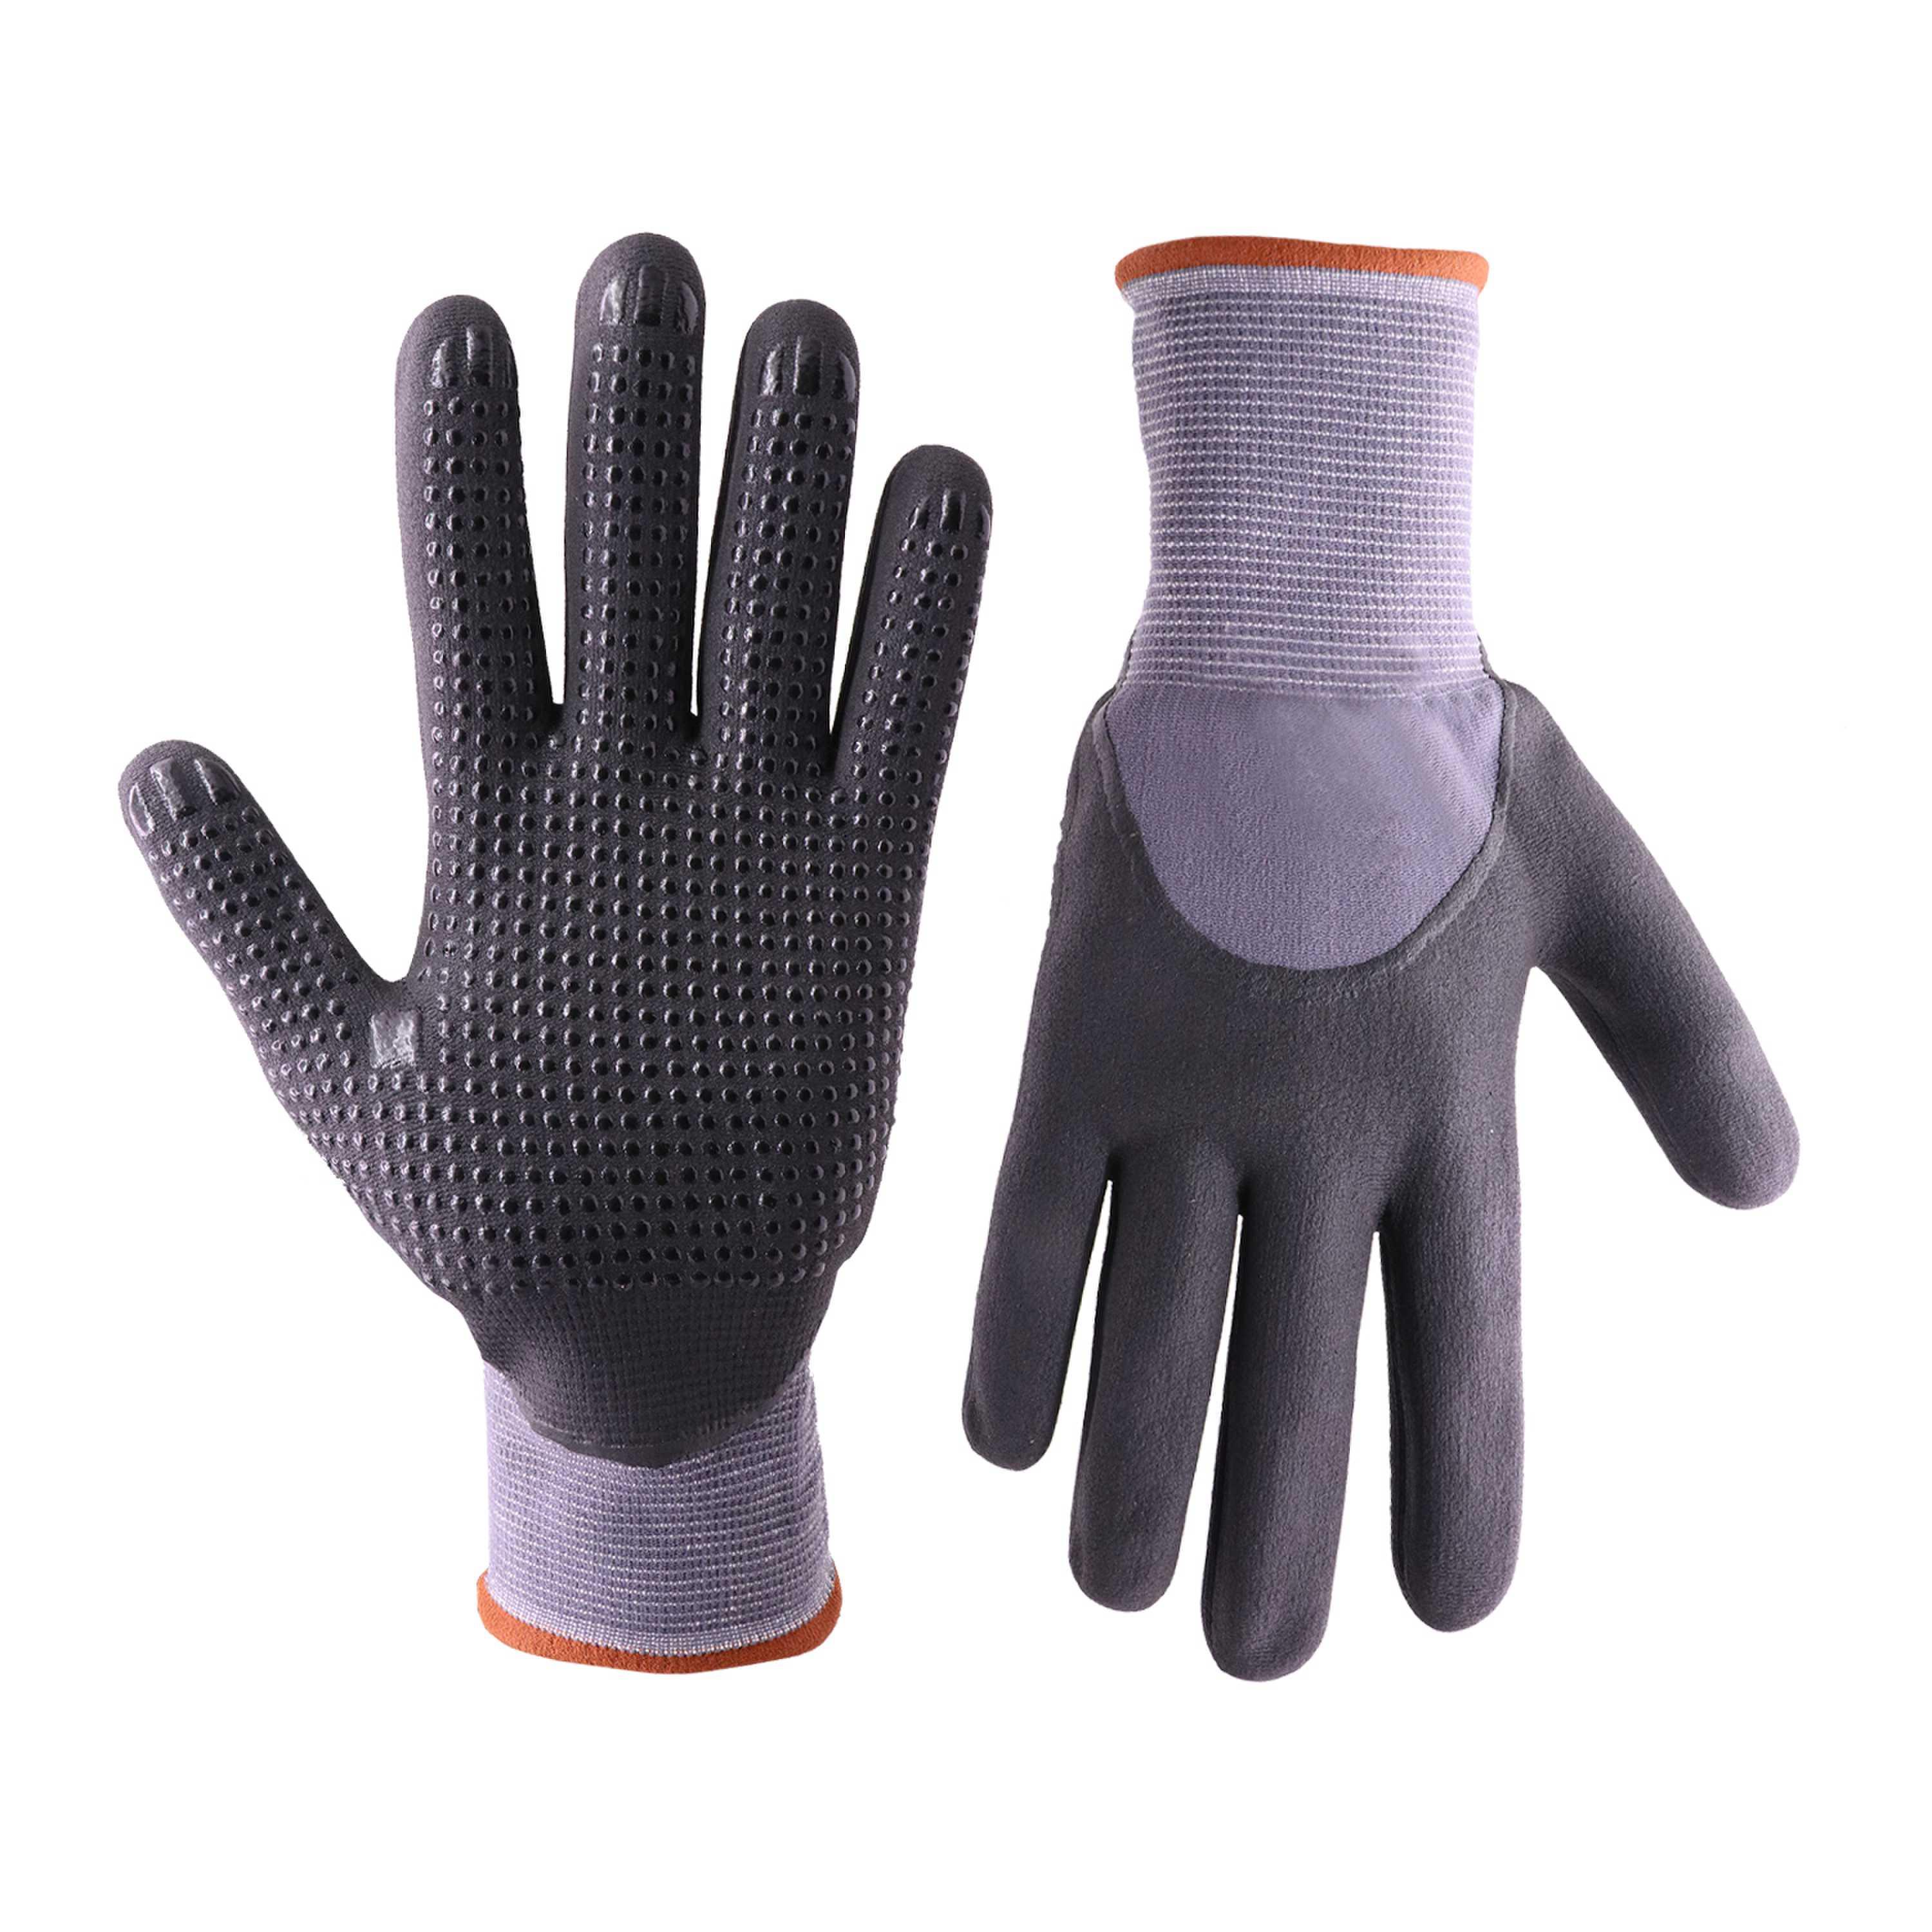 1124 PRISAFETY Nitrile Polyester Palm Coating Home Yard Work Garden Gloves Anti Slip Construction Dipped Gloves